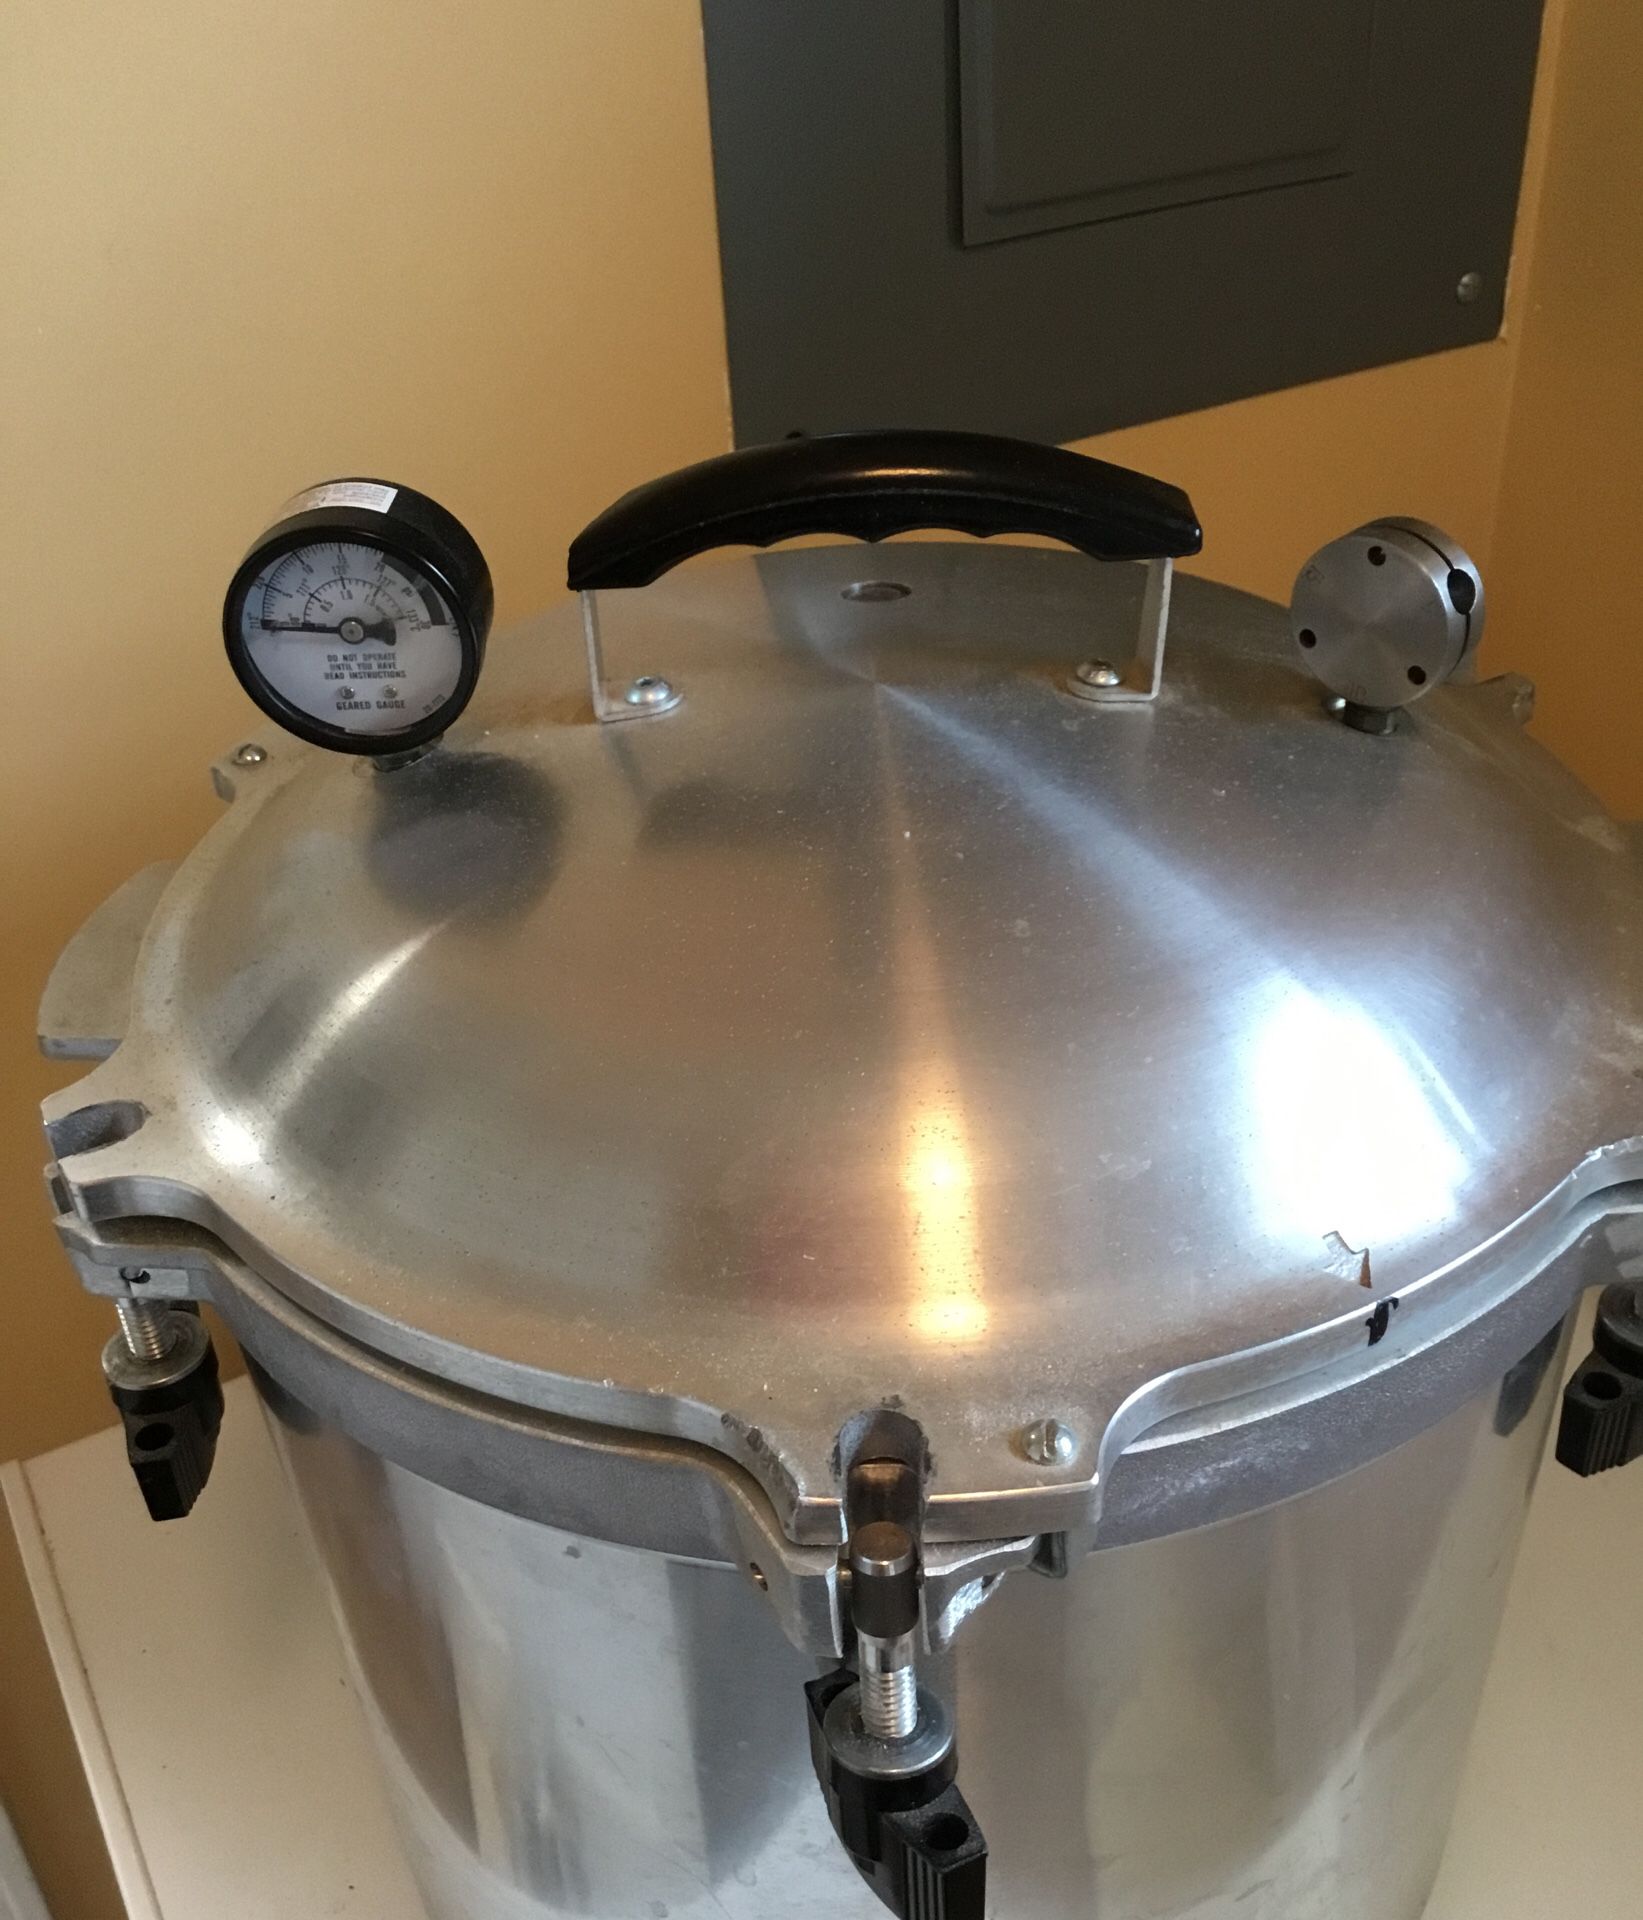 Nesco Smart Canner for Sale in Puyallup, WA - OfferUp